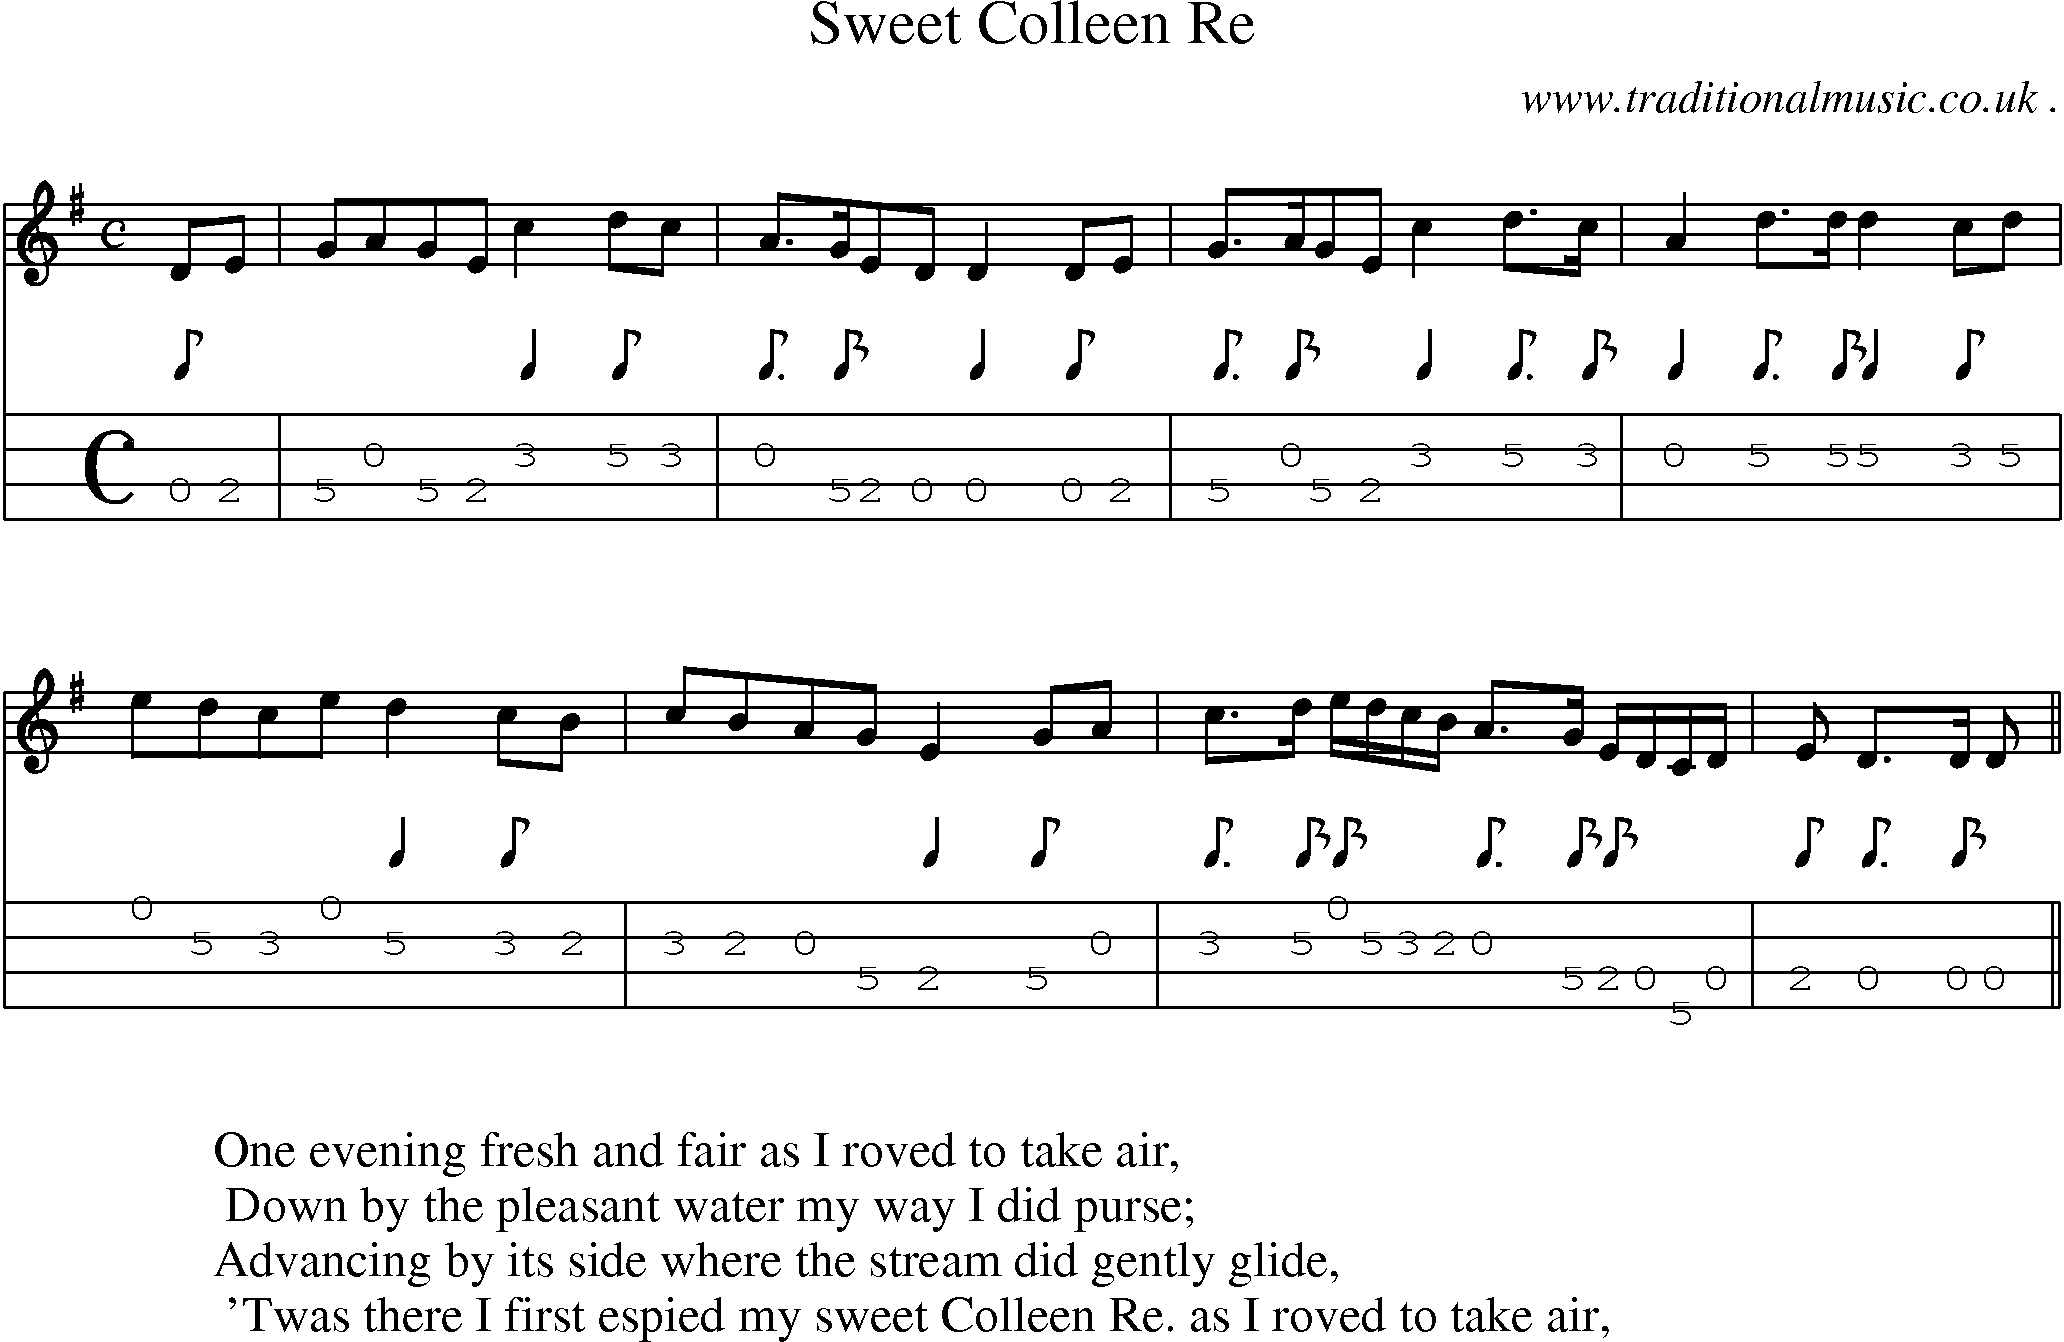 Sheet-Music and Mandolin Tabs for Sweet Colleen Re